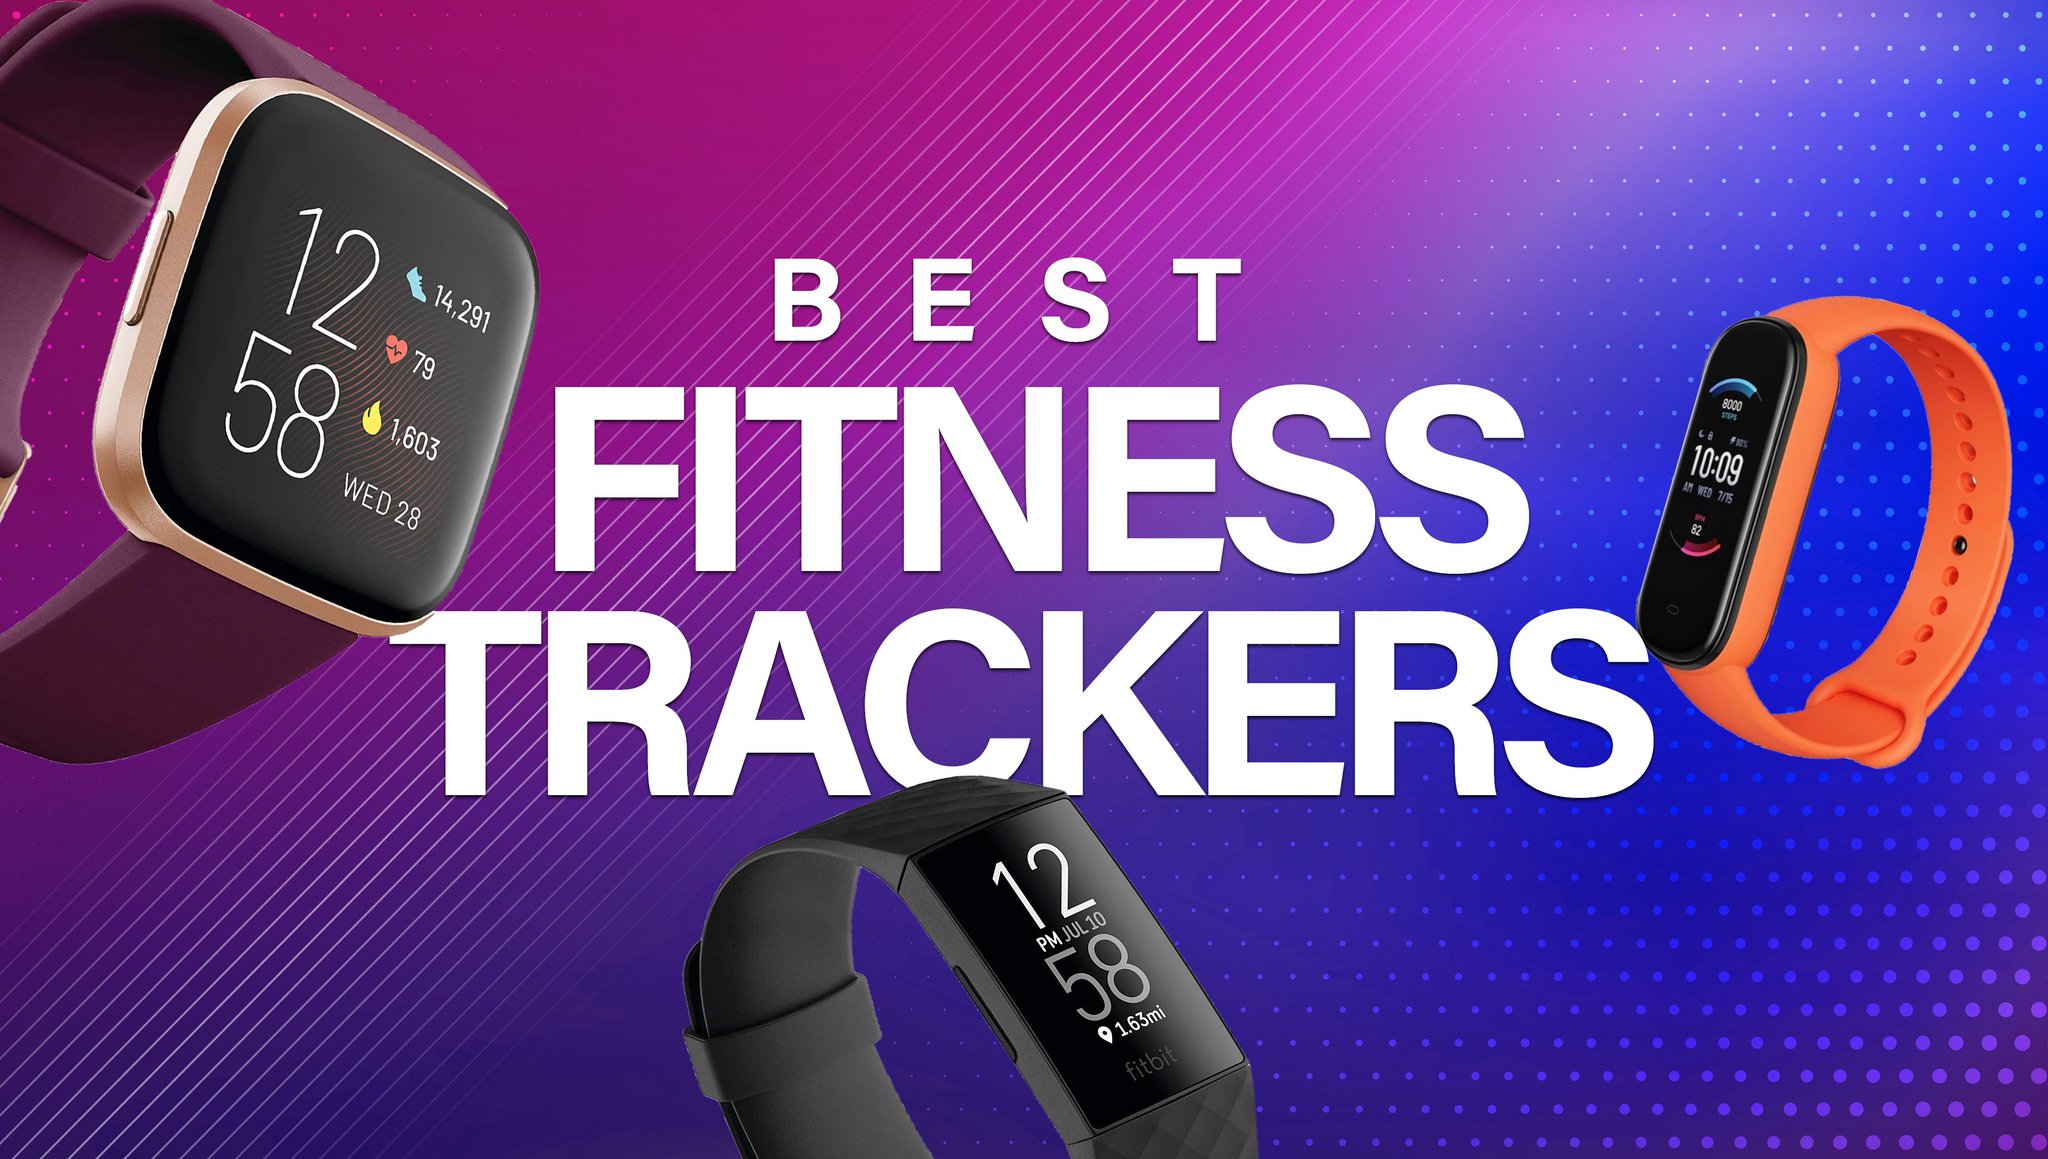 10 Best Activity And Fitness Trackers With Built-in GPS